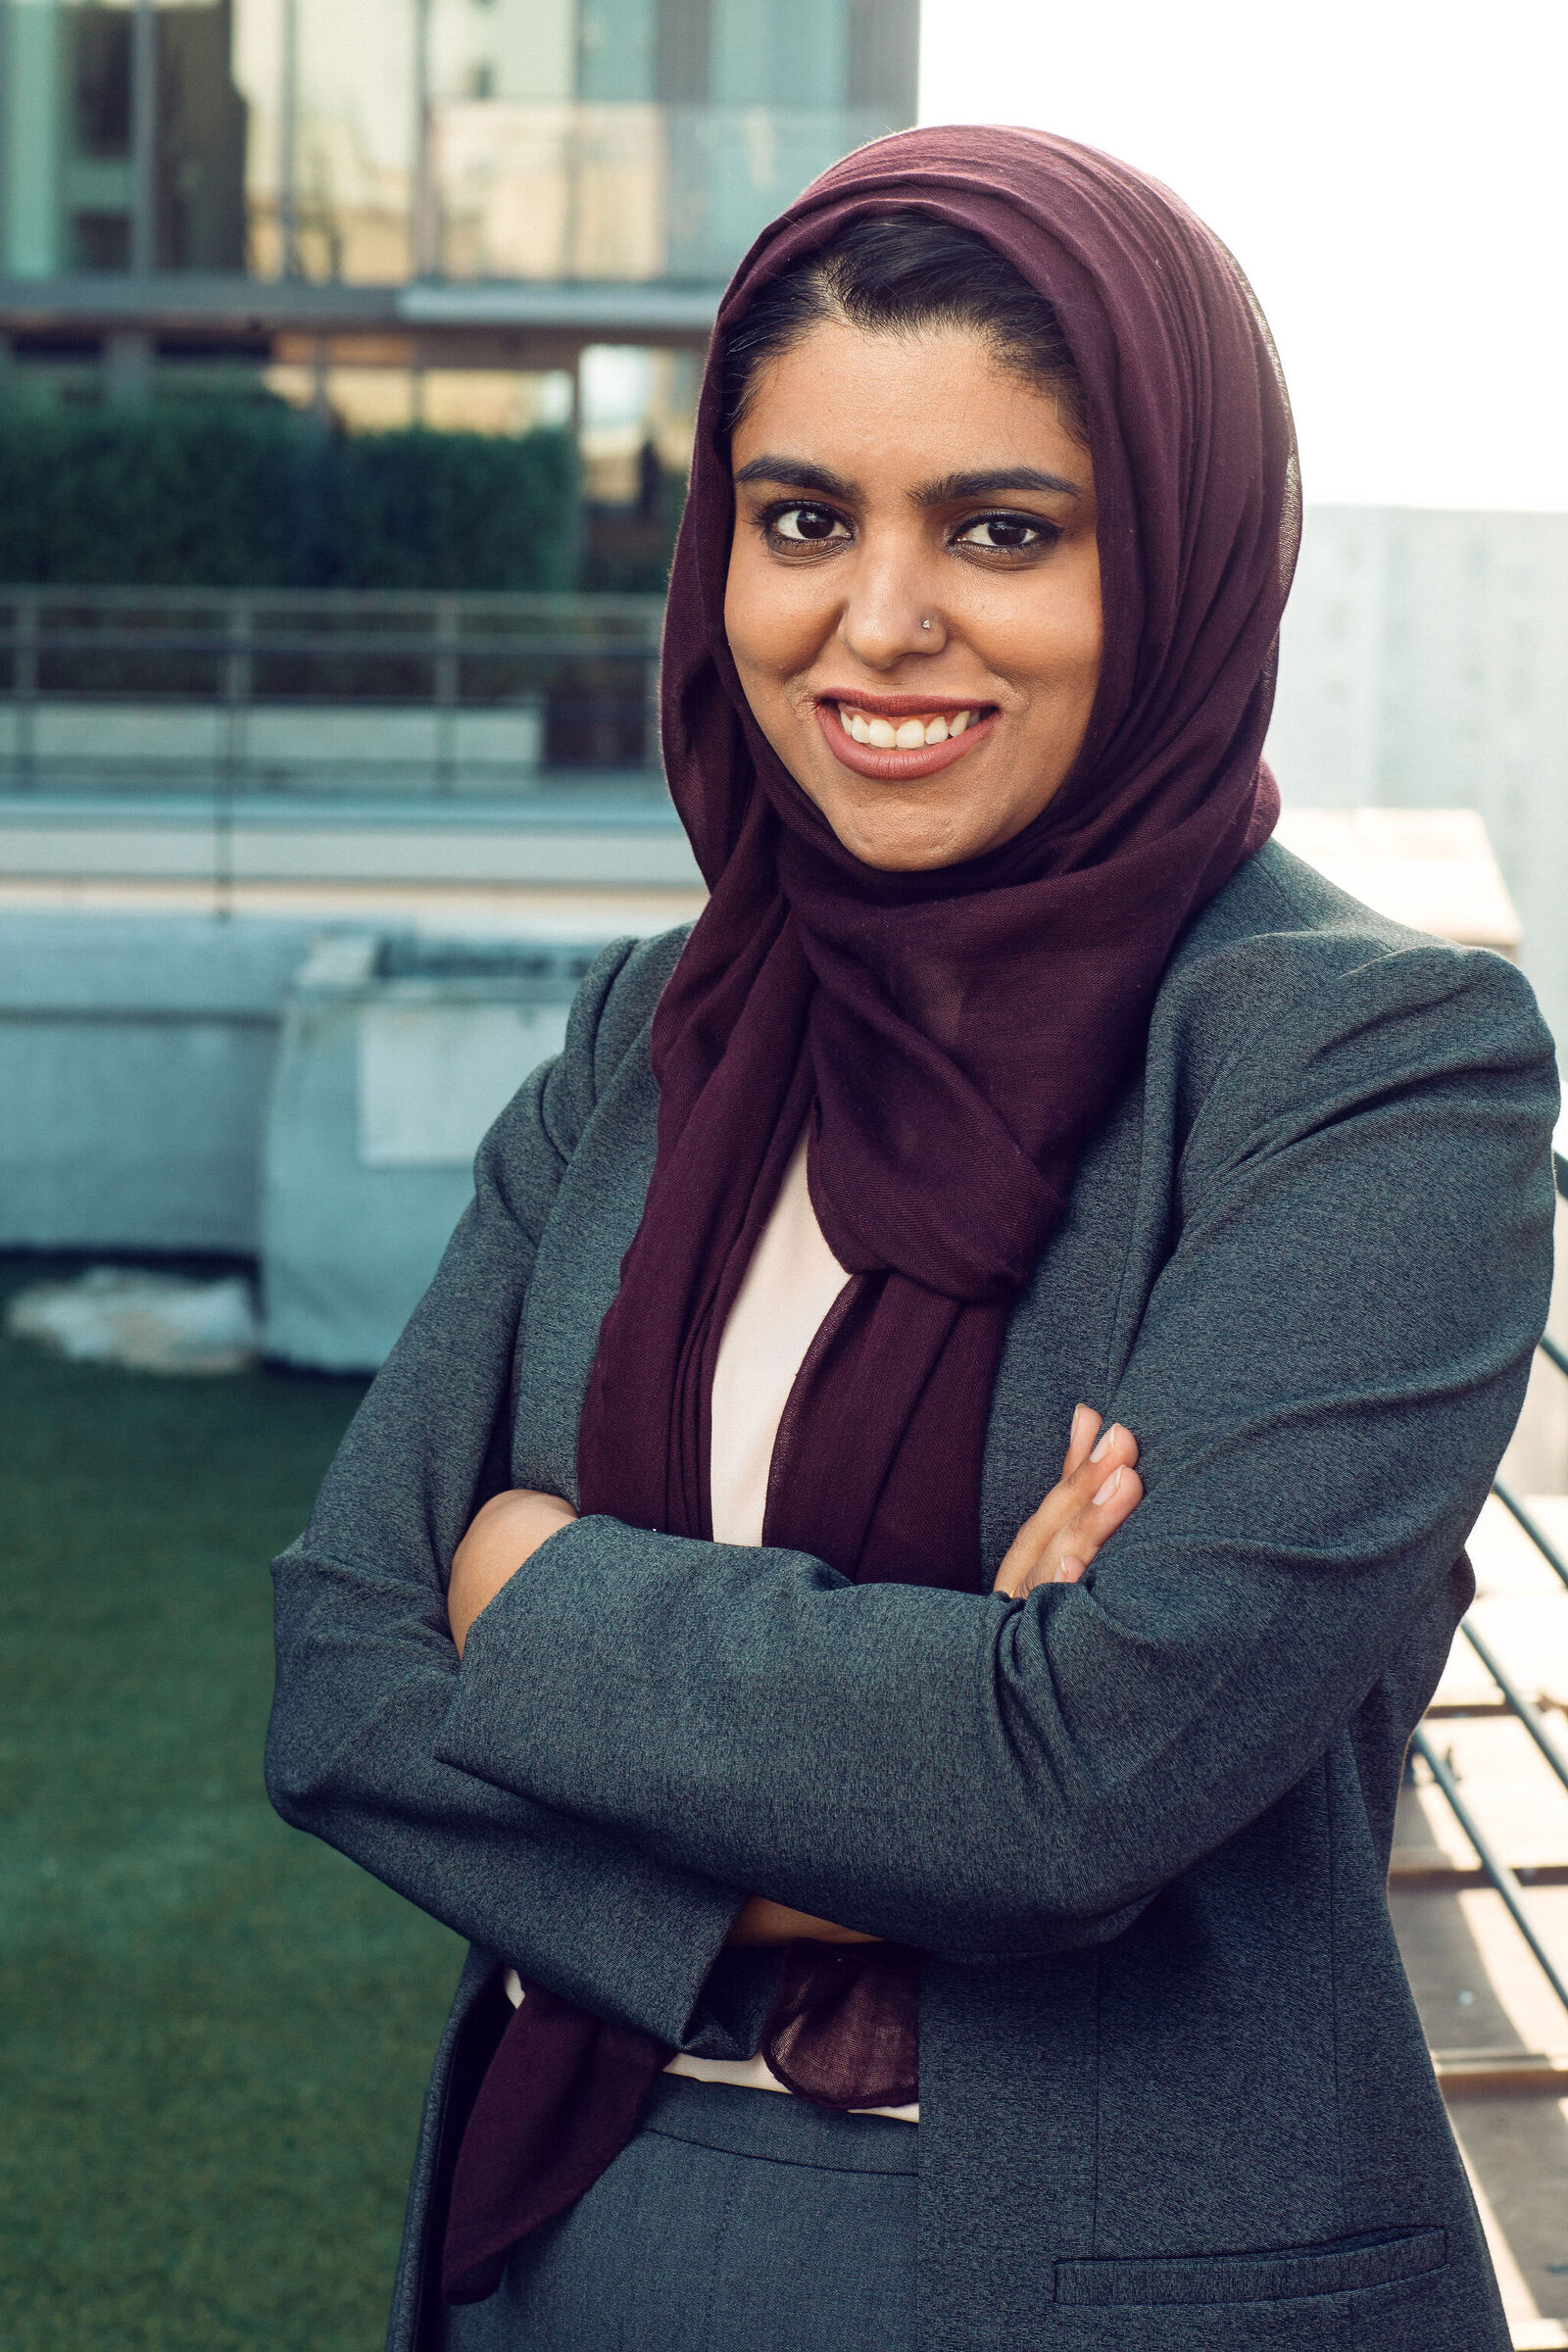 Business Portrait Of Woman In Gray Suit And Violet Hijab Los Angeles